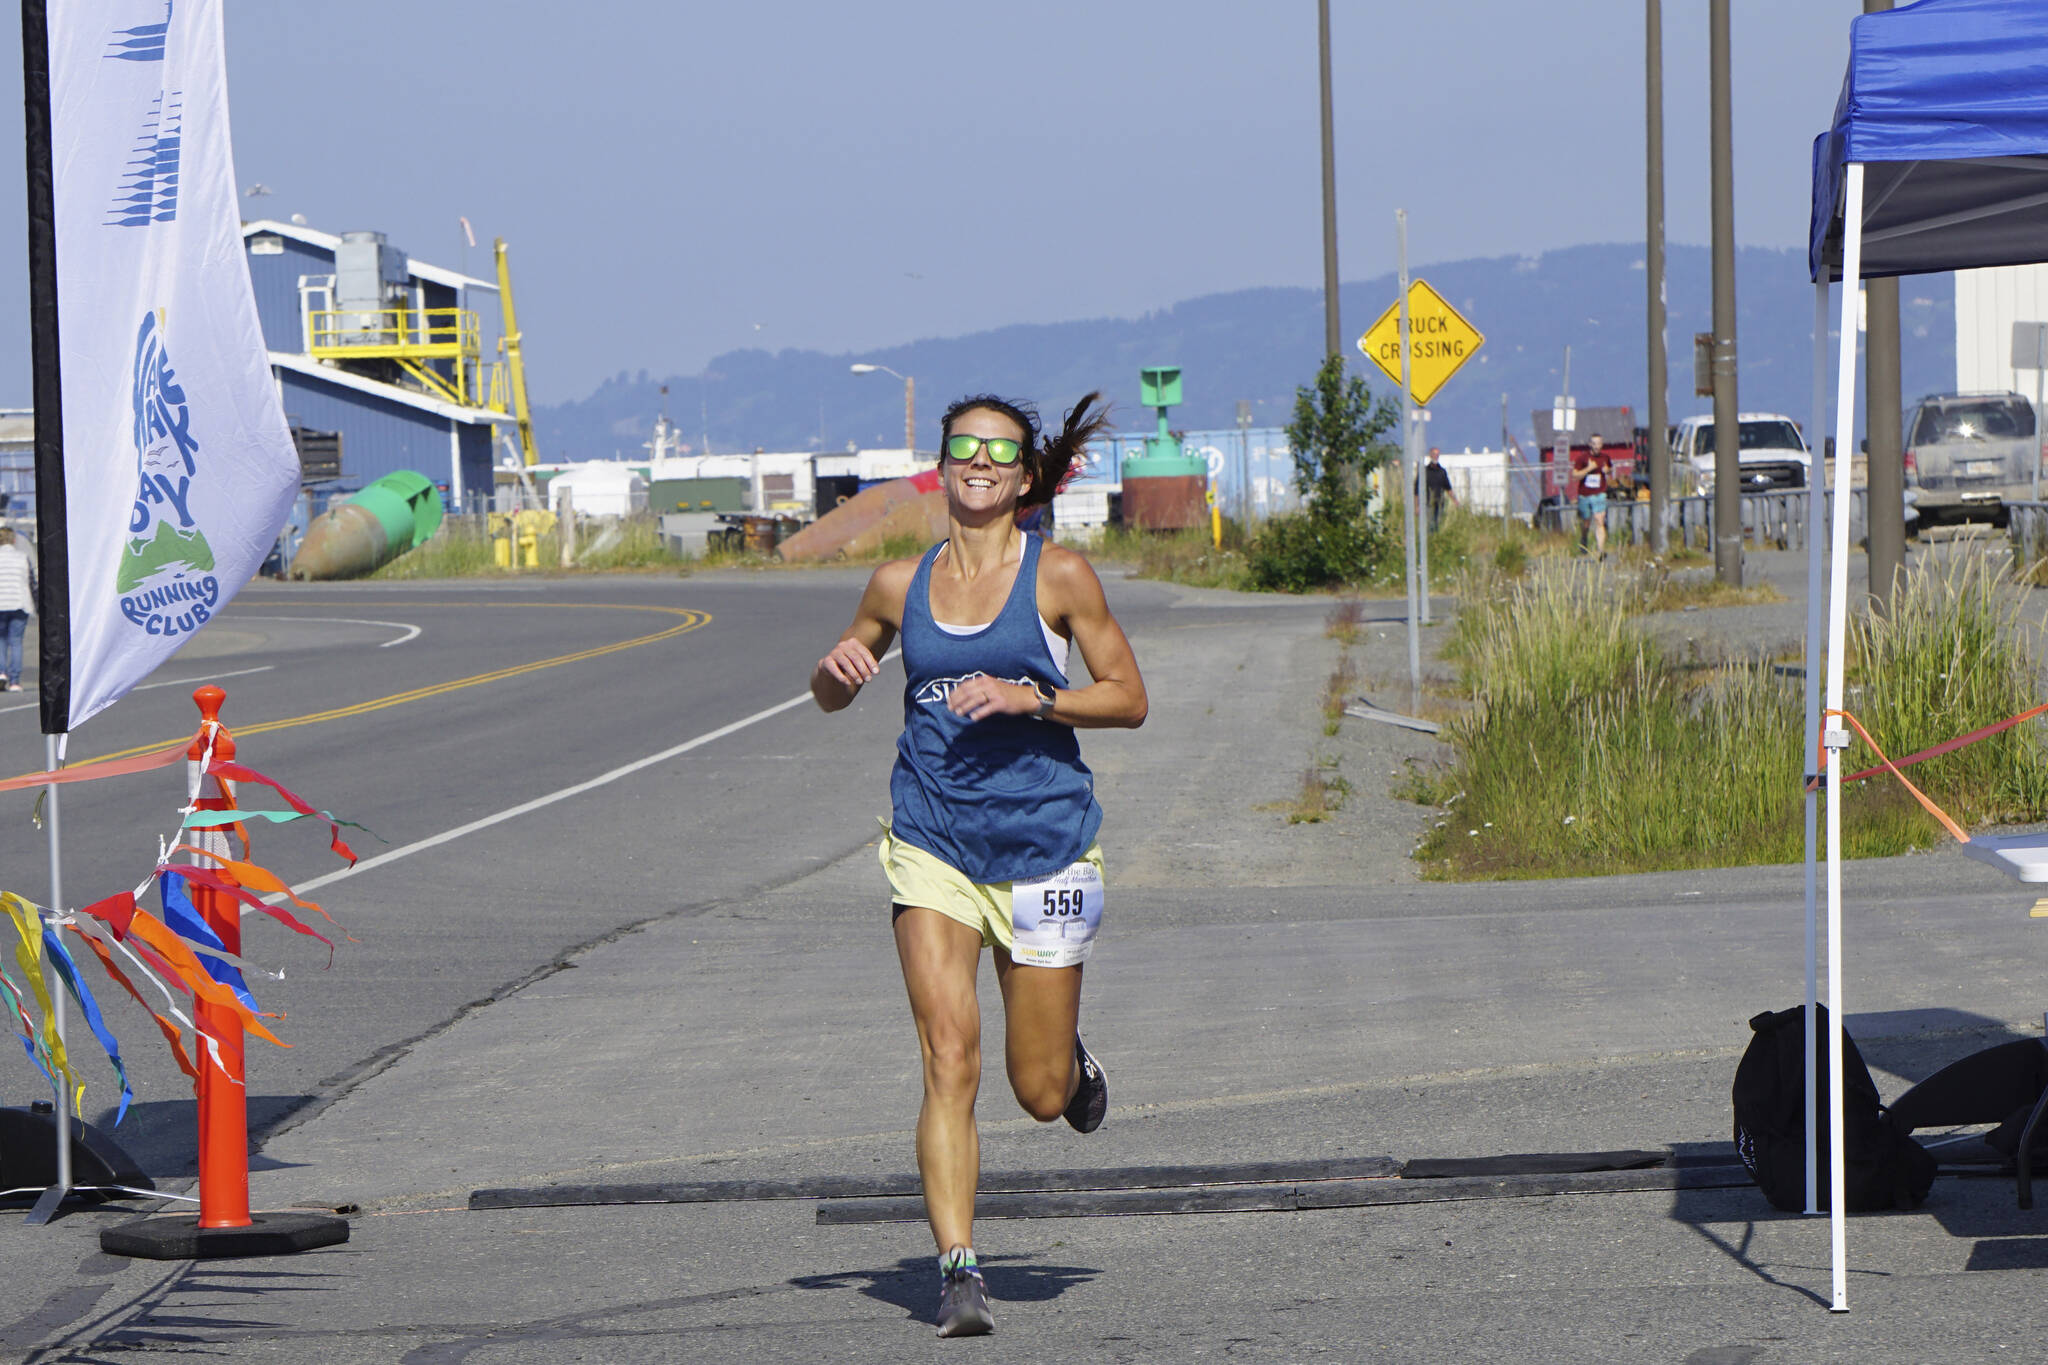 Amanda Cherok, the first-place woman runner in the 2022 Homer Spit Run, crosses the finish line on Saturday, June 25, 2022, at the End of the Road Park in Homer, Alaska. (Photo by Michael Armstrong/Homer News)